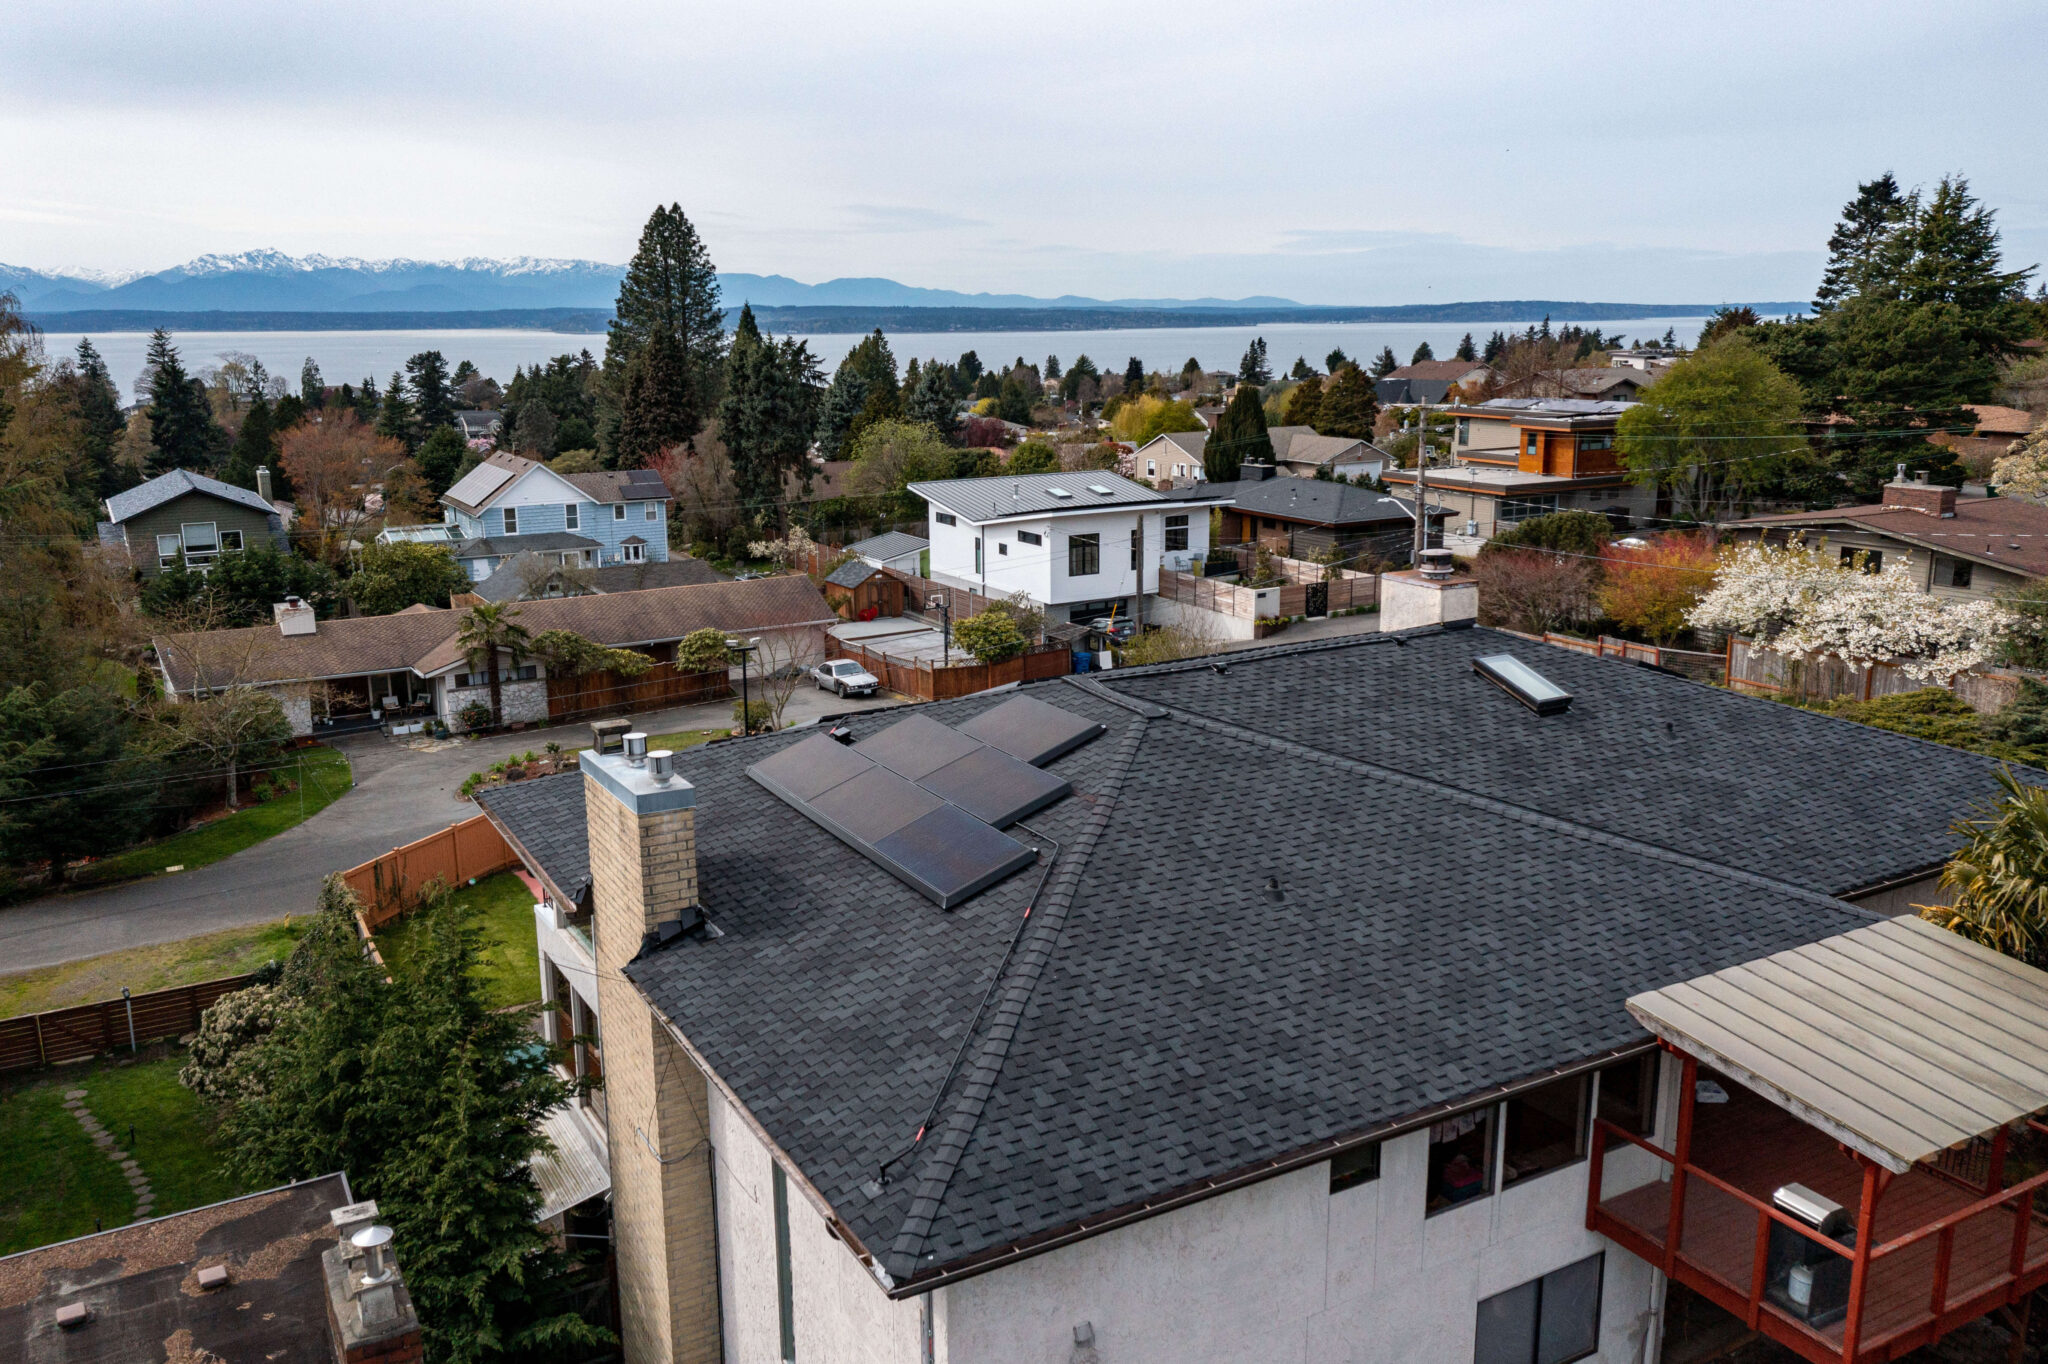 Tesla solar panel system in North Seattle with Olympic mountain range in the background